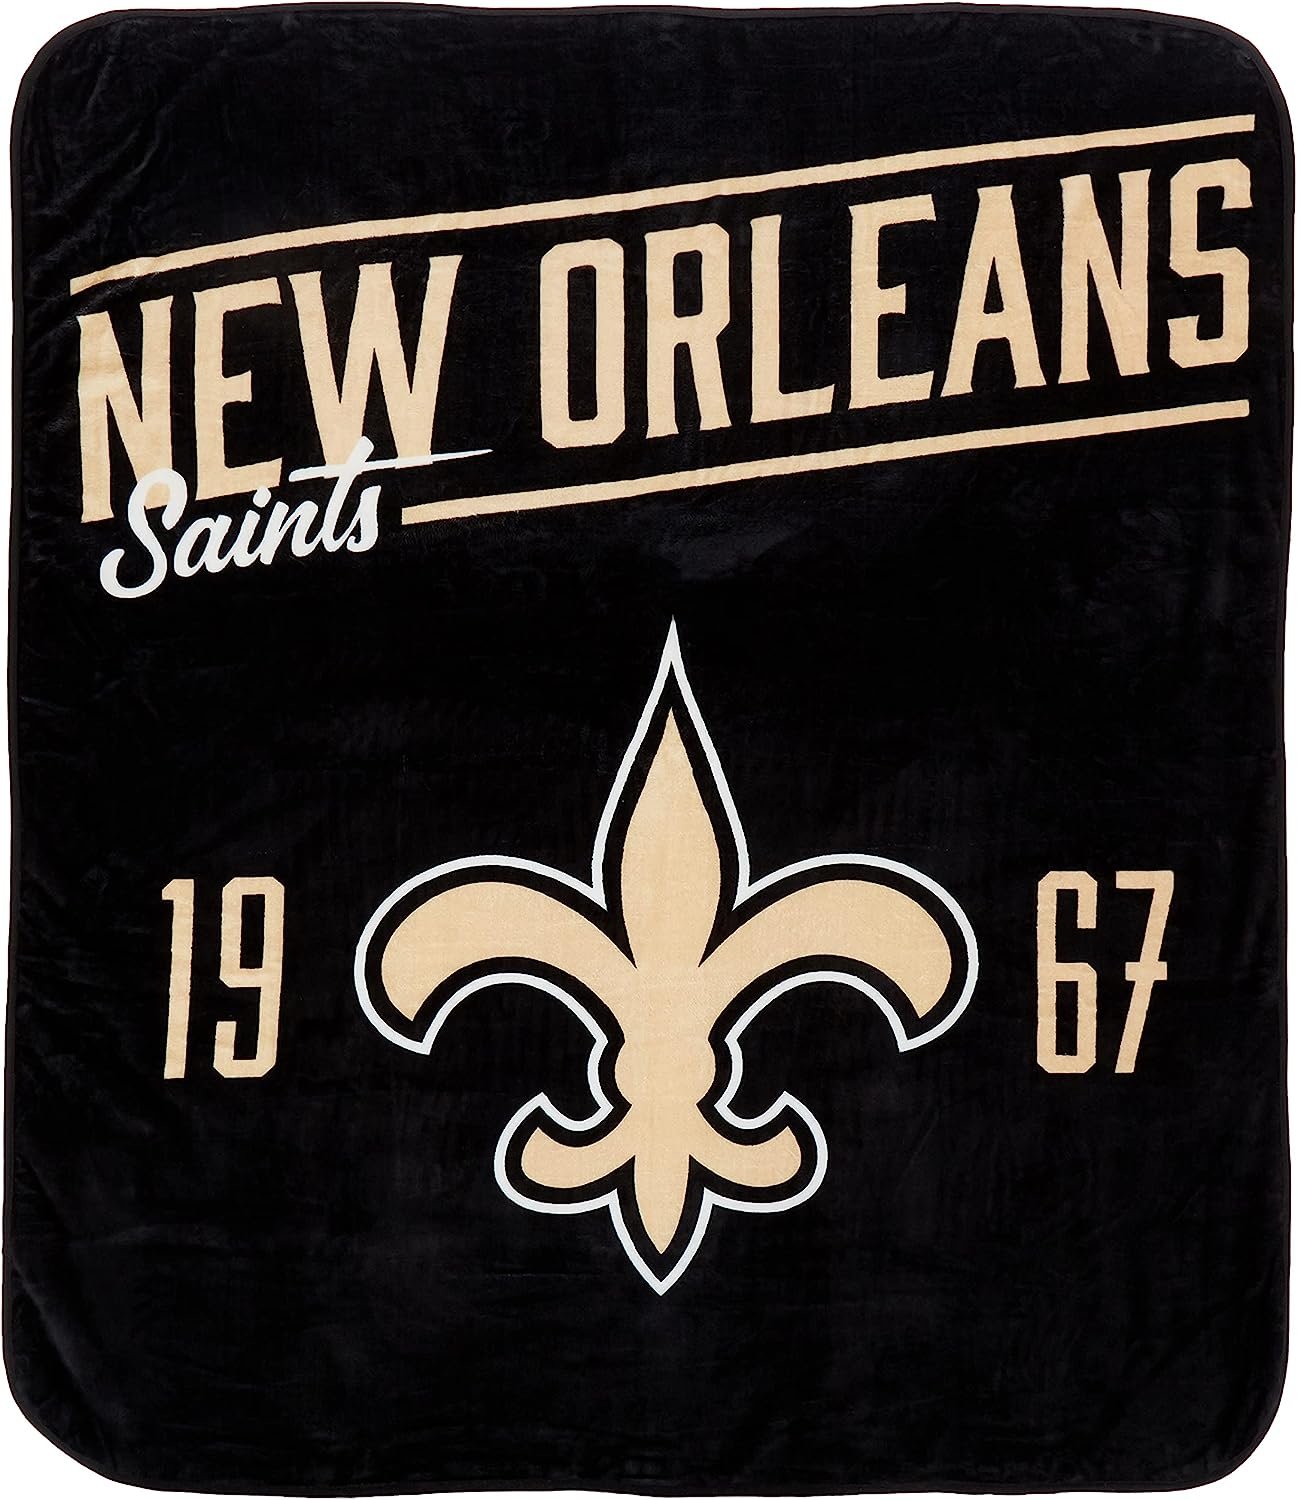 New Orleans Saints Throw Blanket, Sherpa Silk Touch Design, Motion Style, 60x70 Inch, Unisex Adult